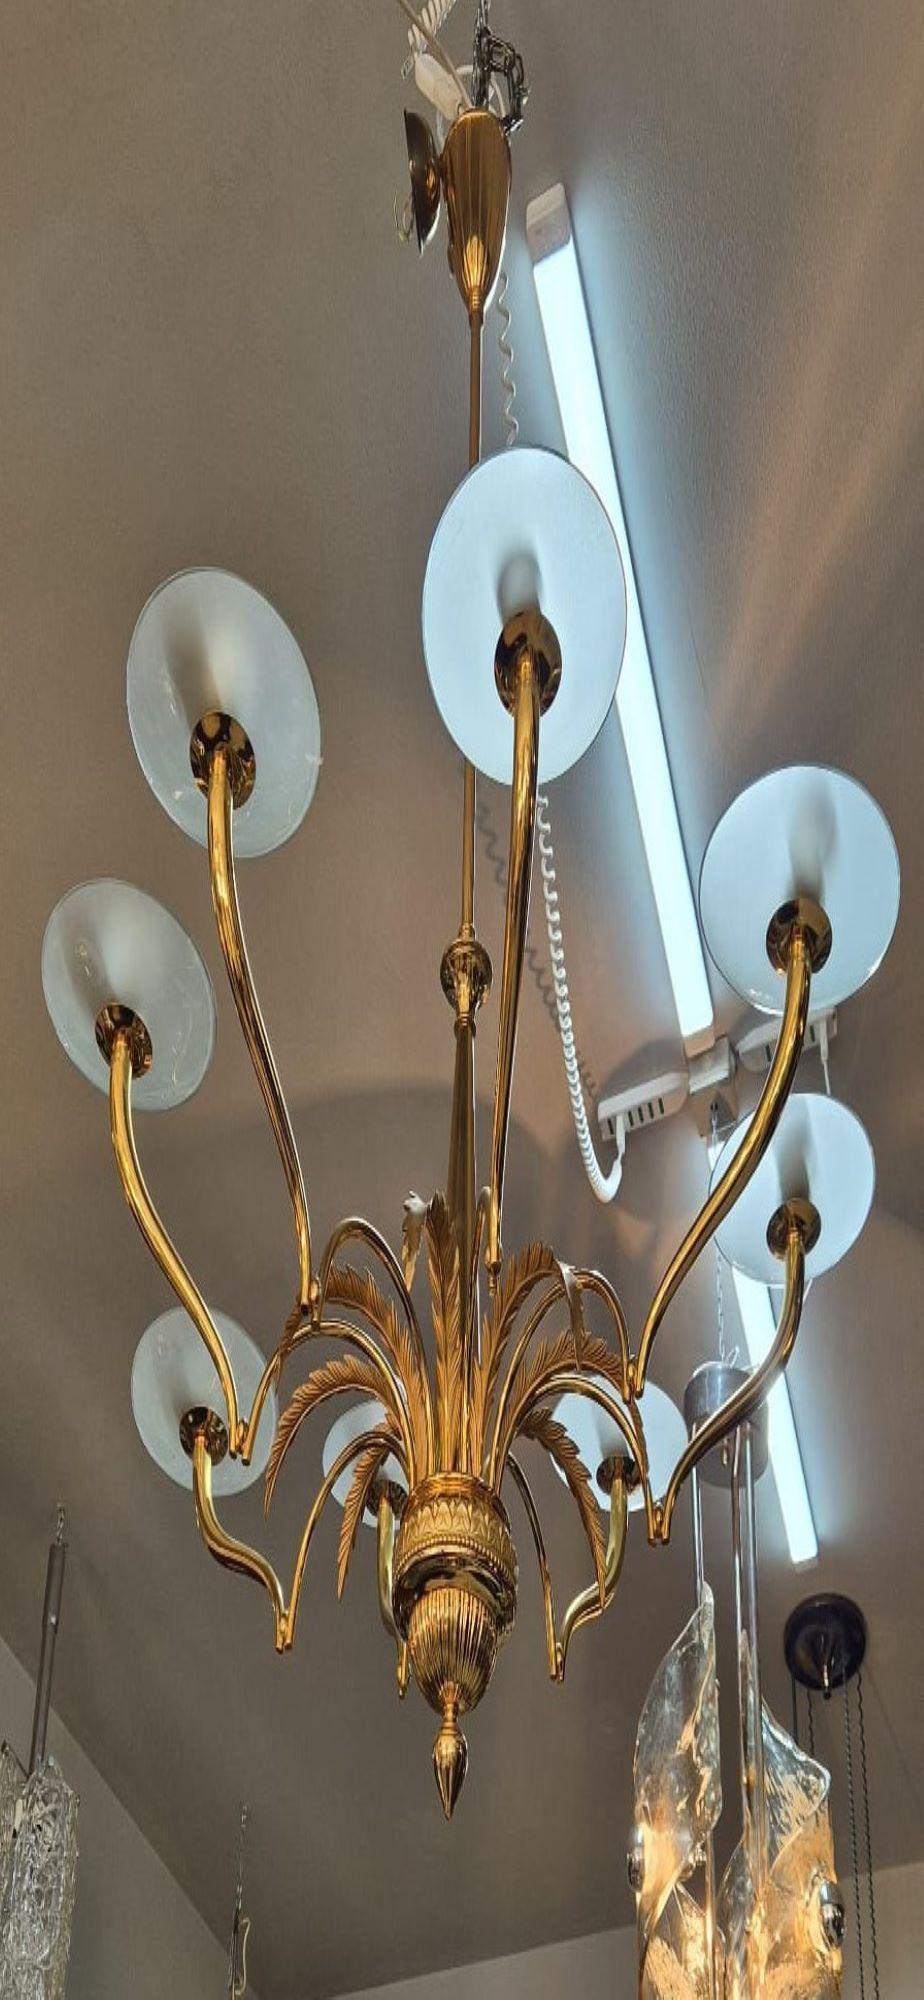 Gold eight-light chandelier designer Oscar Torlasco for Lumi Milano. The metal frame features eight arms with glass lampshades and metal leaves between each arm.